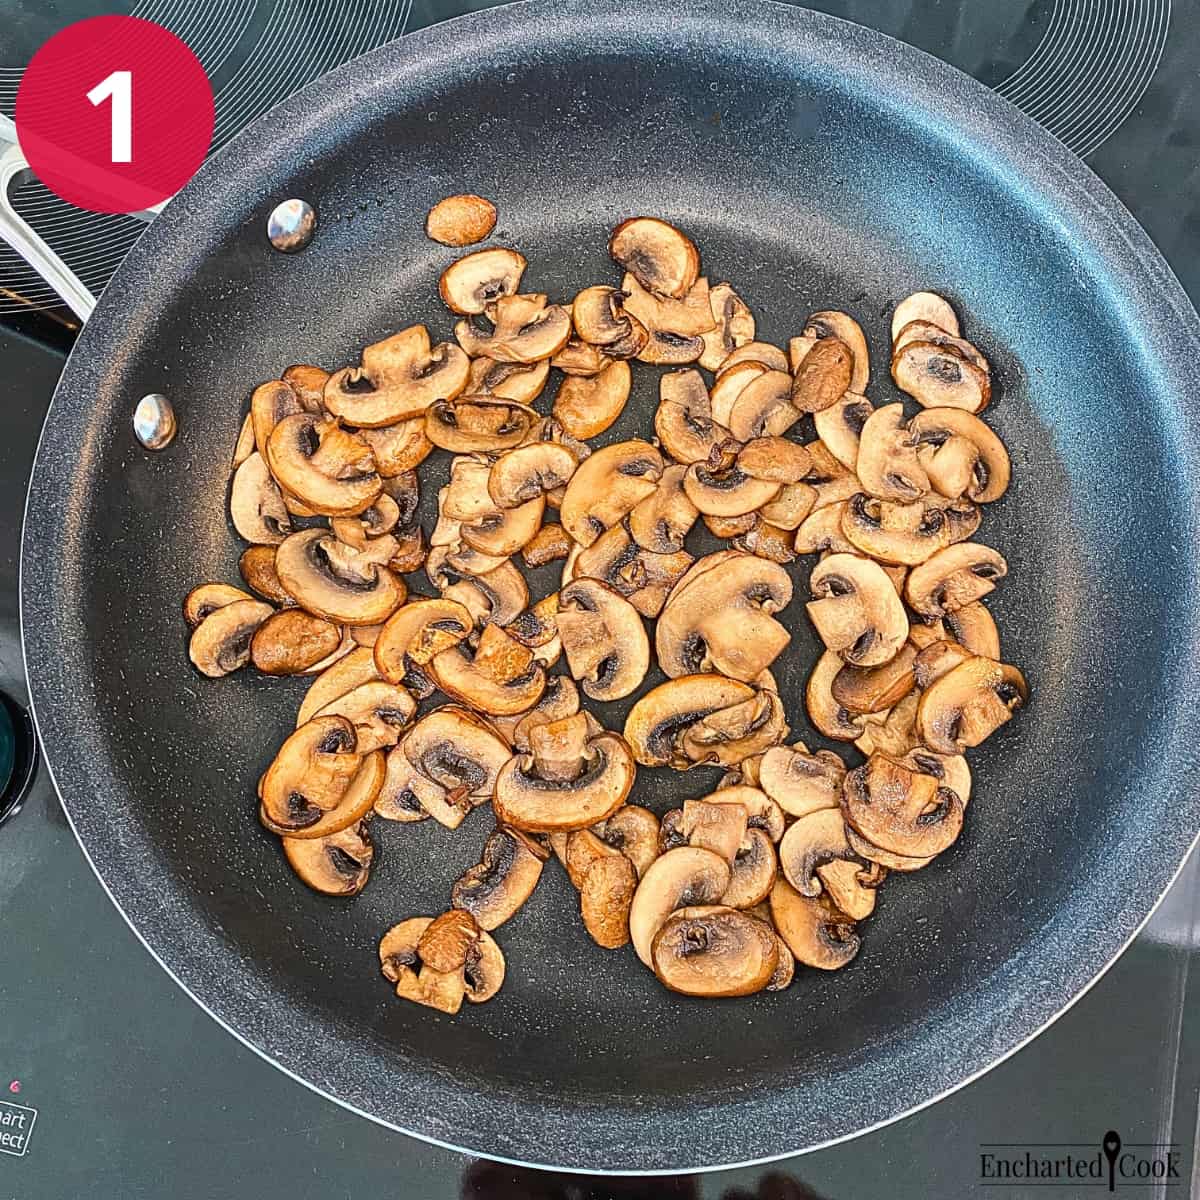 Process Photo 1 - Sautéing sliced mushrooms with butter until they are browned and reduced in volume.